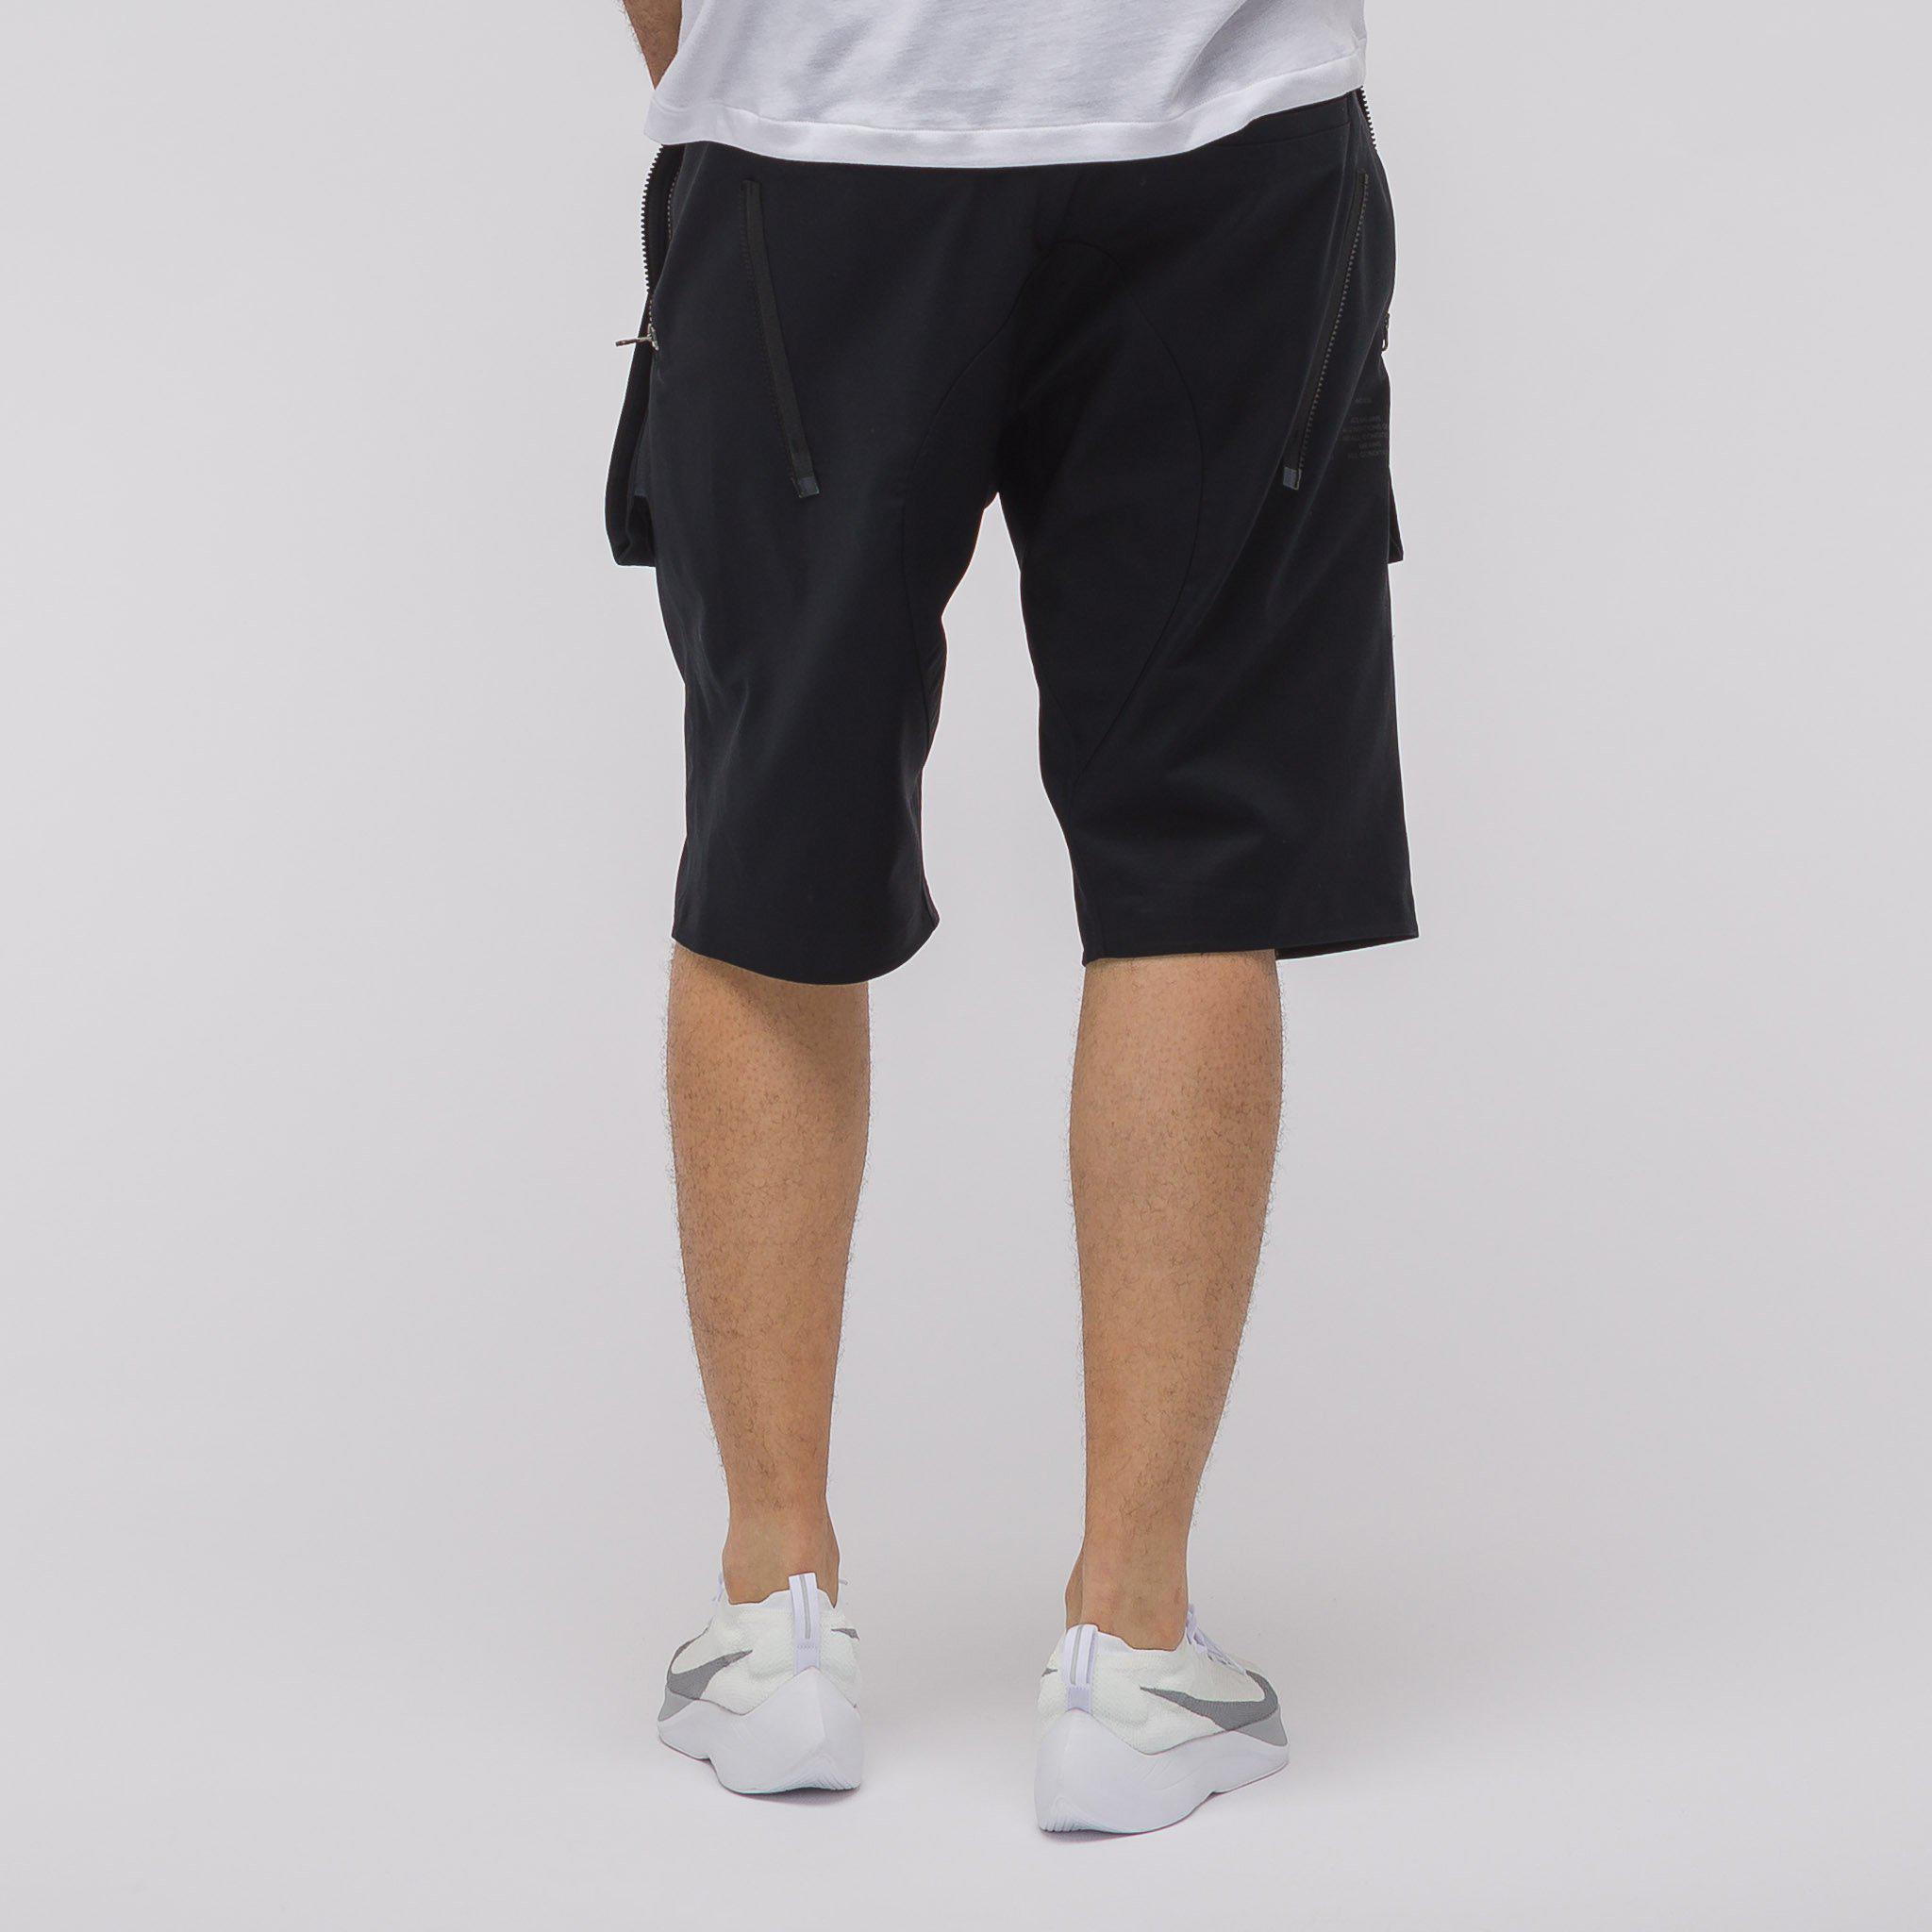 Nike Cotton Acg Deploy Cargo Shorts In Black for Men - Lyst